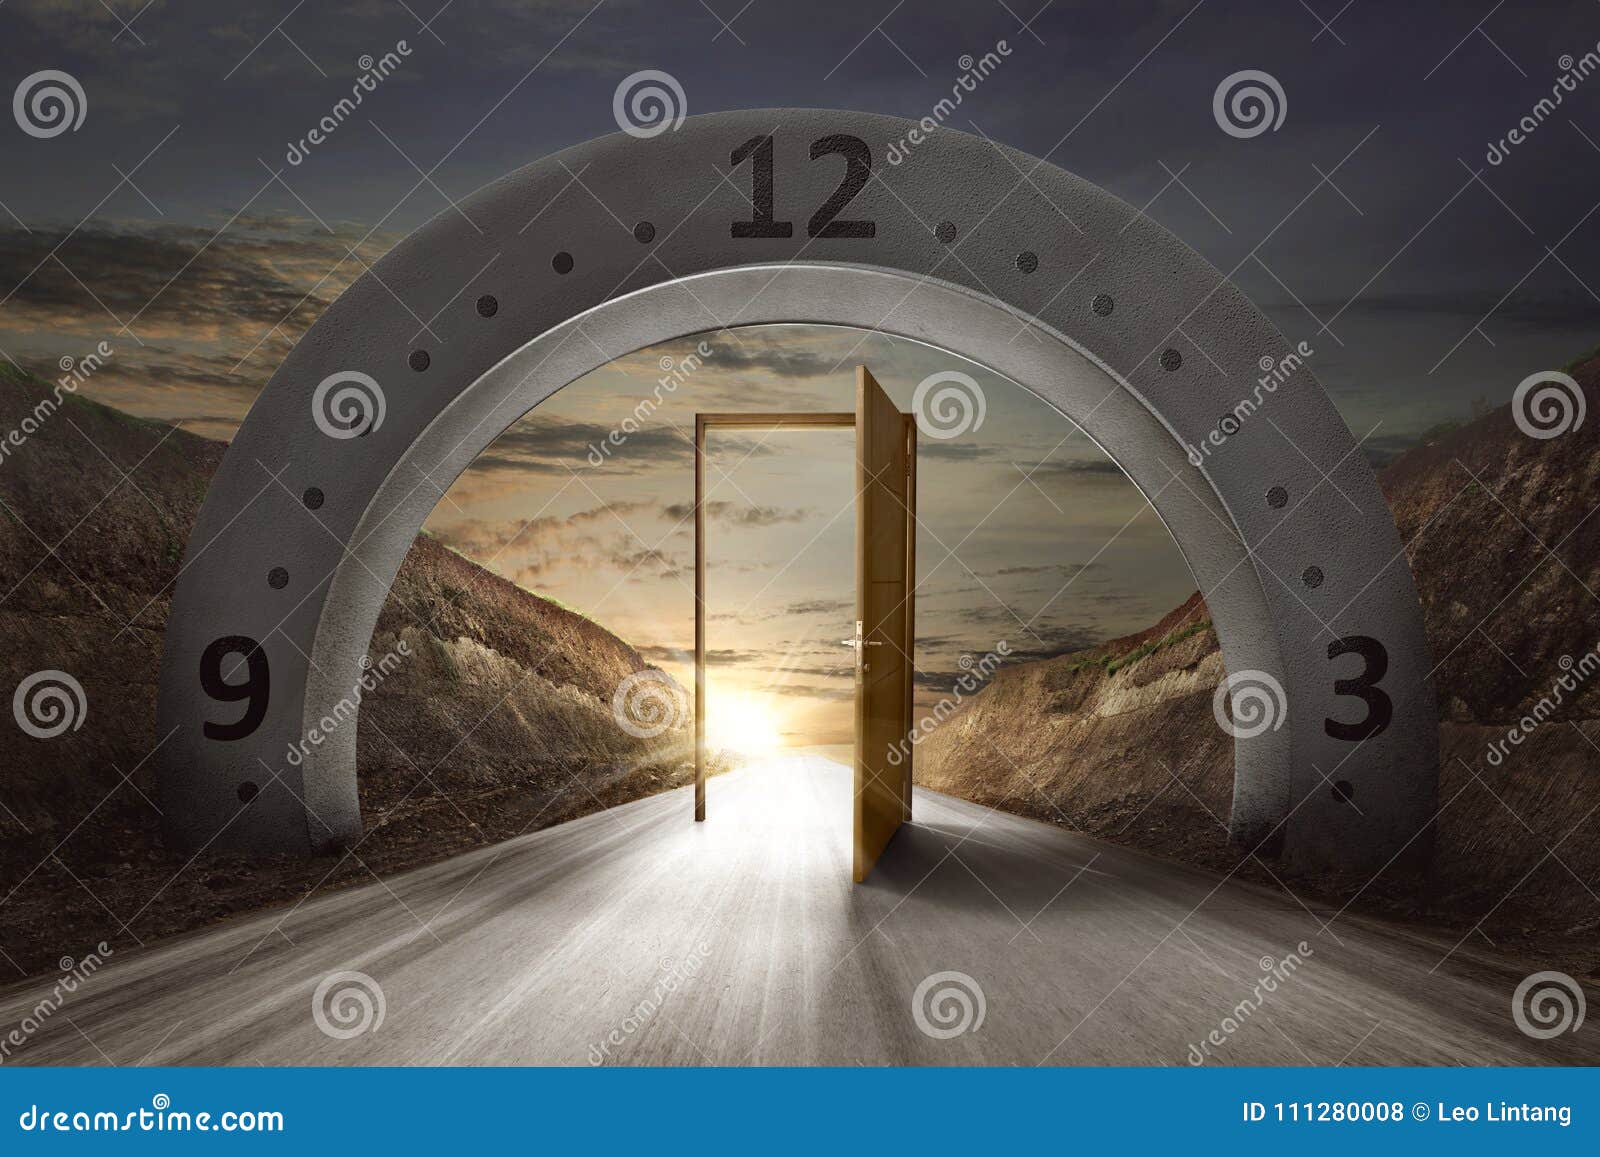 gateway arch with clock face and open door